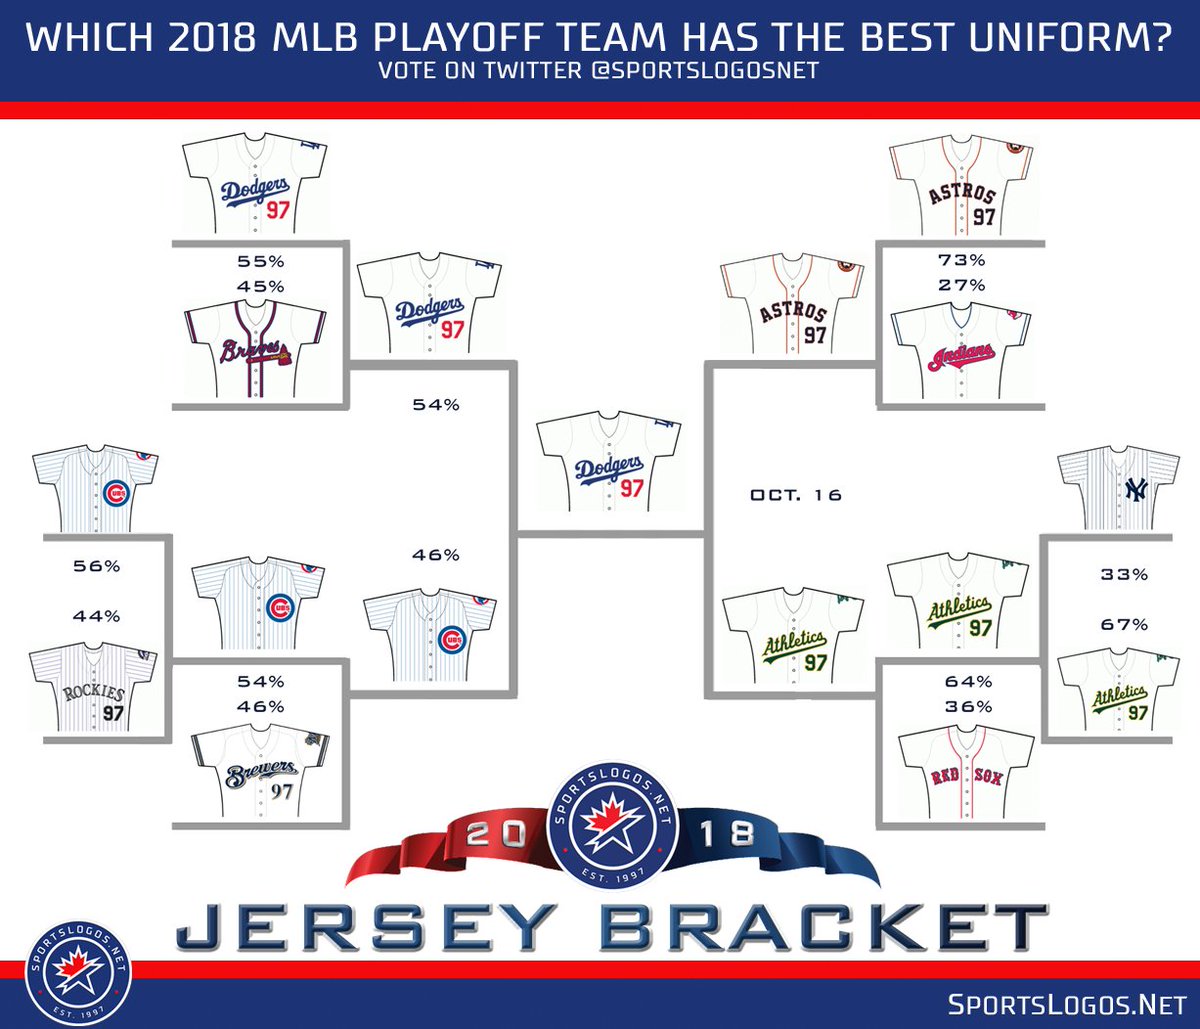 Chris Creamer On Twitter Last Night In Our Mlb Jersey Bracket The Oakland Athletics Surprised The Yankees 67 To 33 And Will Go On To Meet The Red Sox In The Next